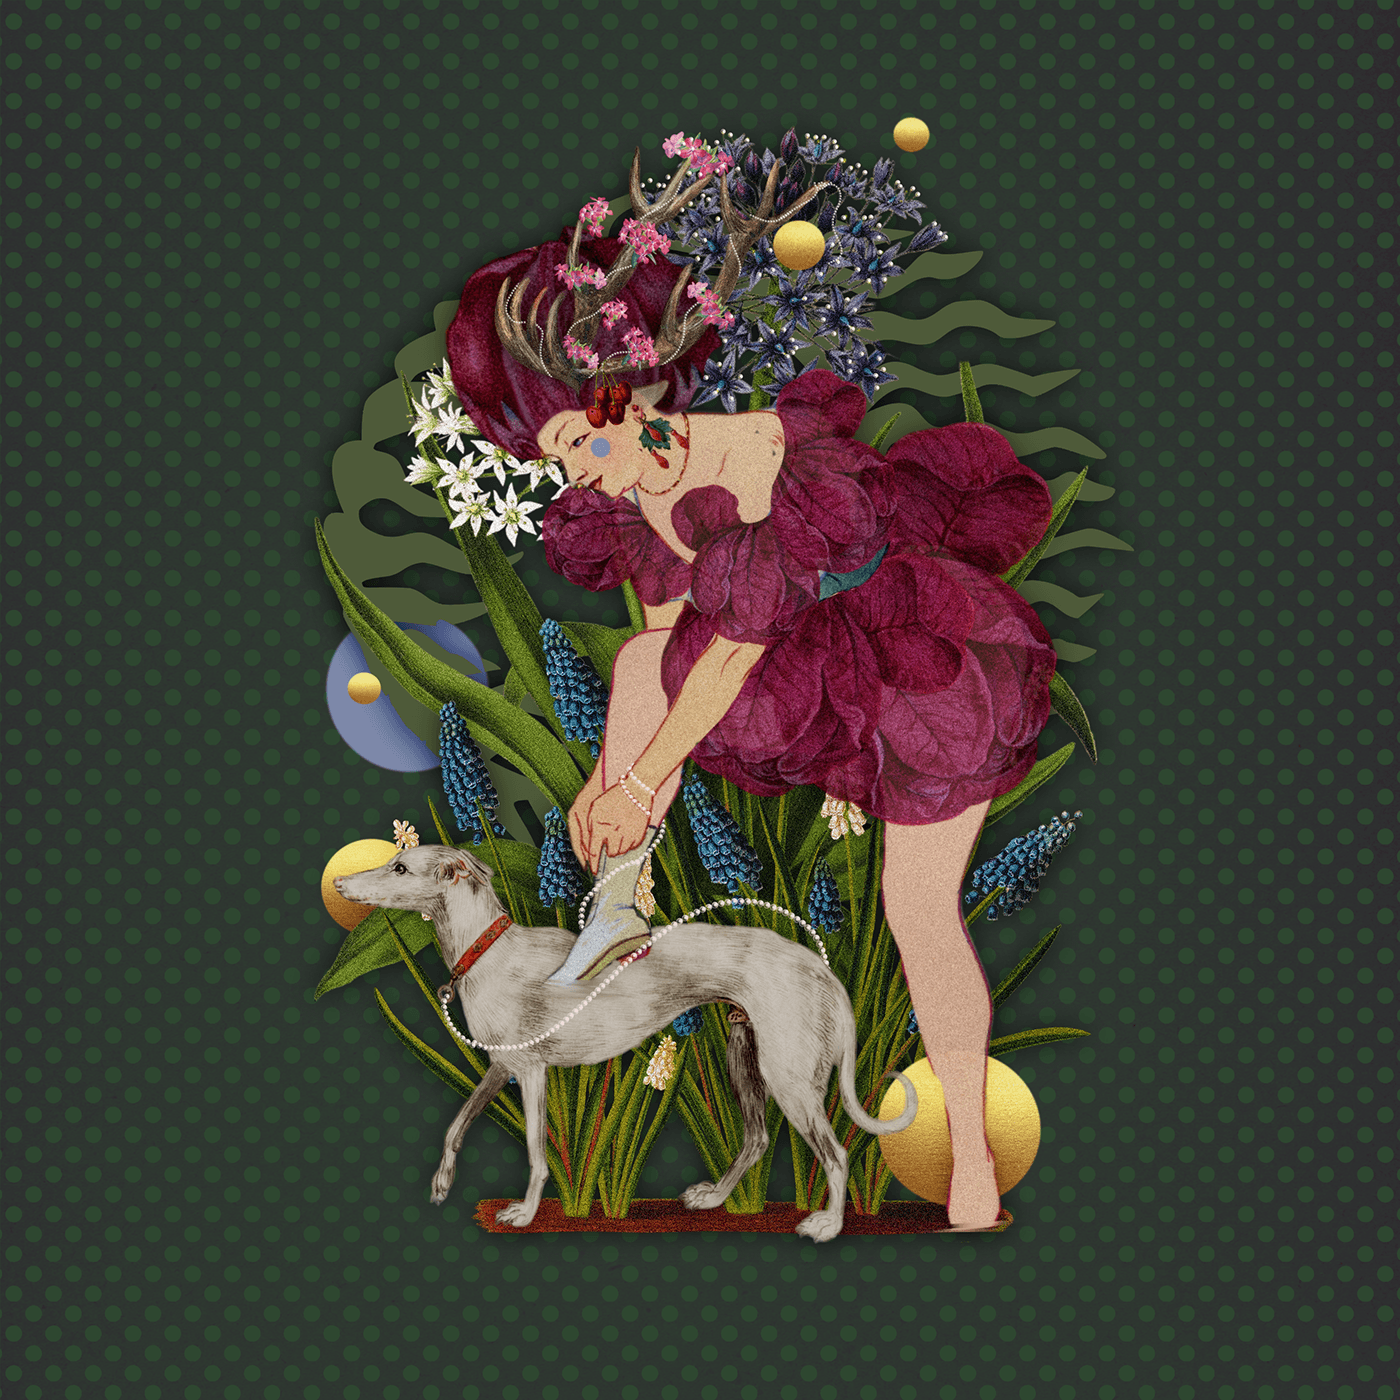 "Enchanted Forest" is a visual immersion into a world where flora and fauna 